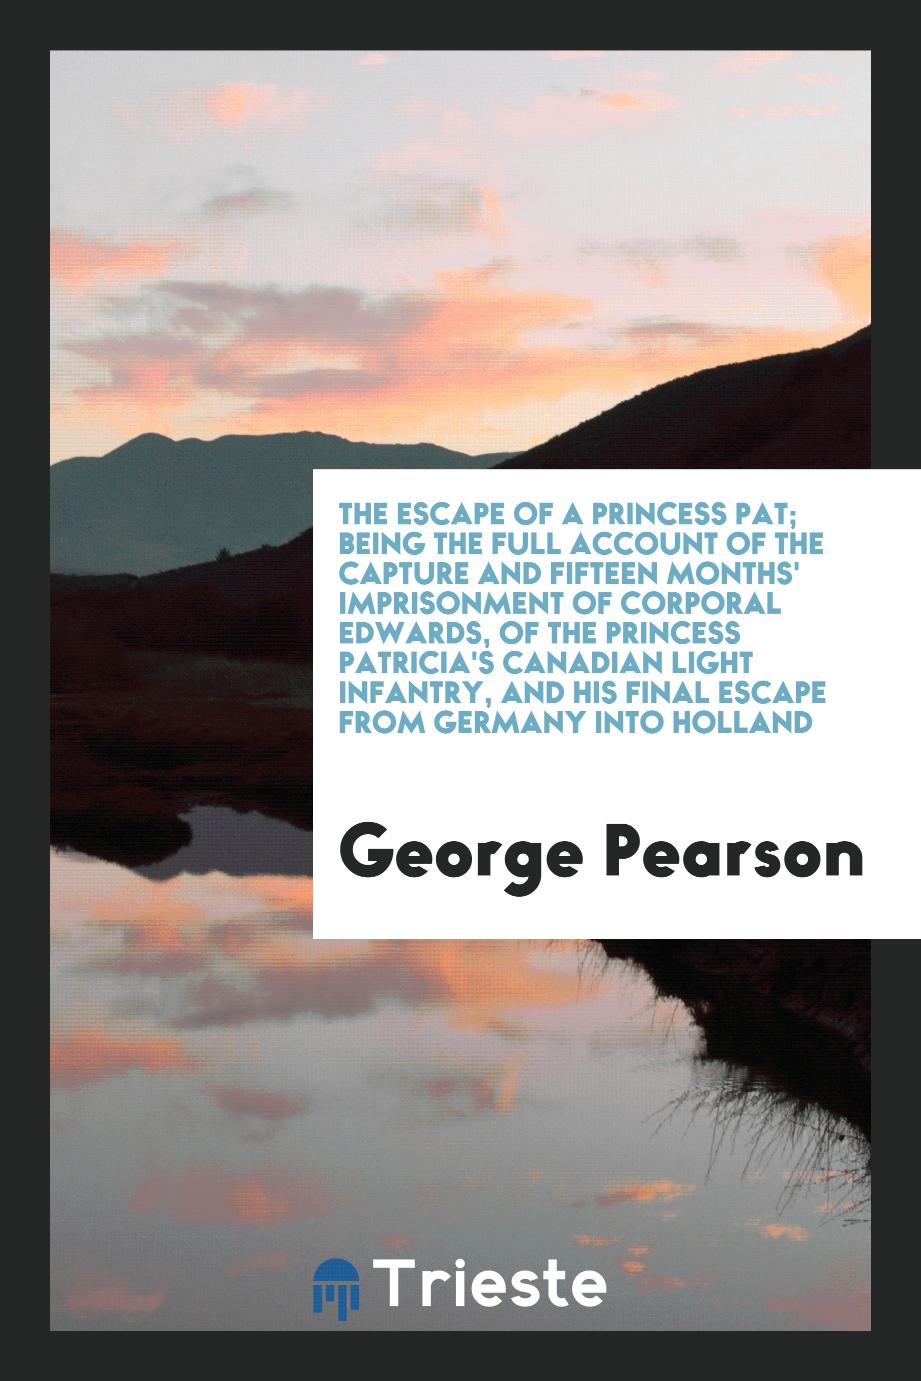 The escape of a Princess Pat; being the full account of the capture and fifteen months' imprisonment of Corporal Edwards, of the Princess Patricia's Canadian Light Infantry, and his final escape from Germany into Holland